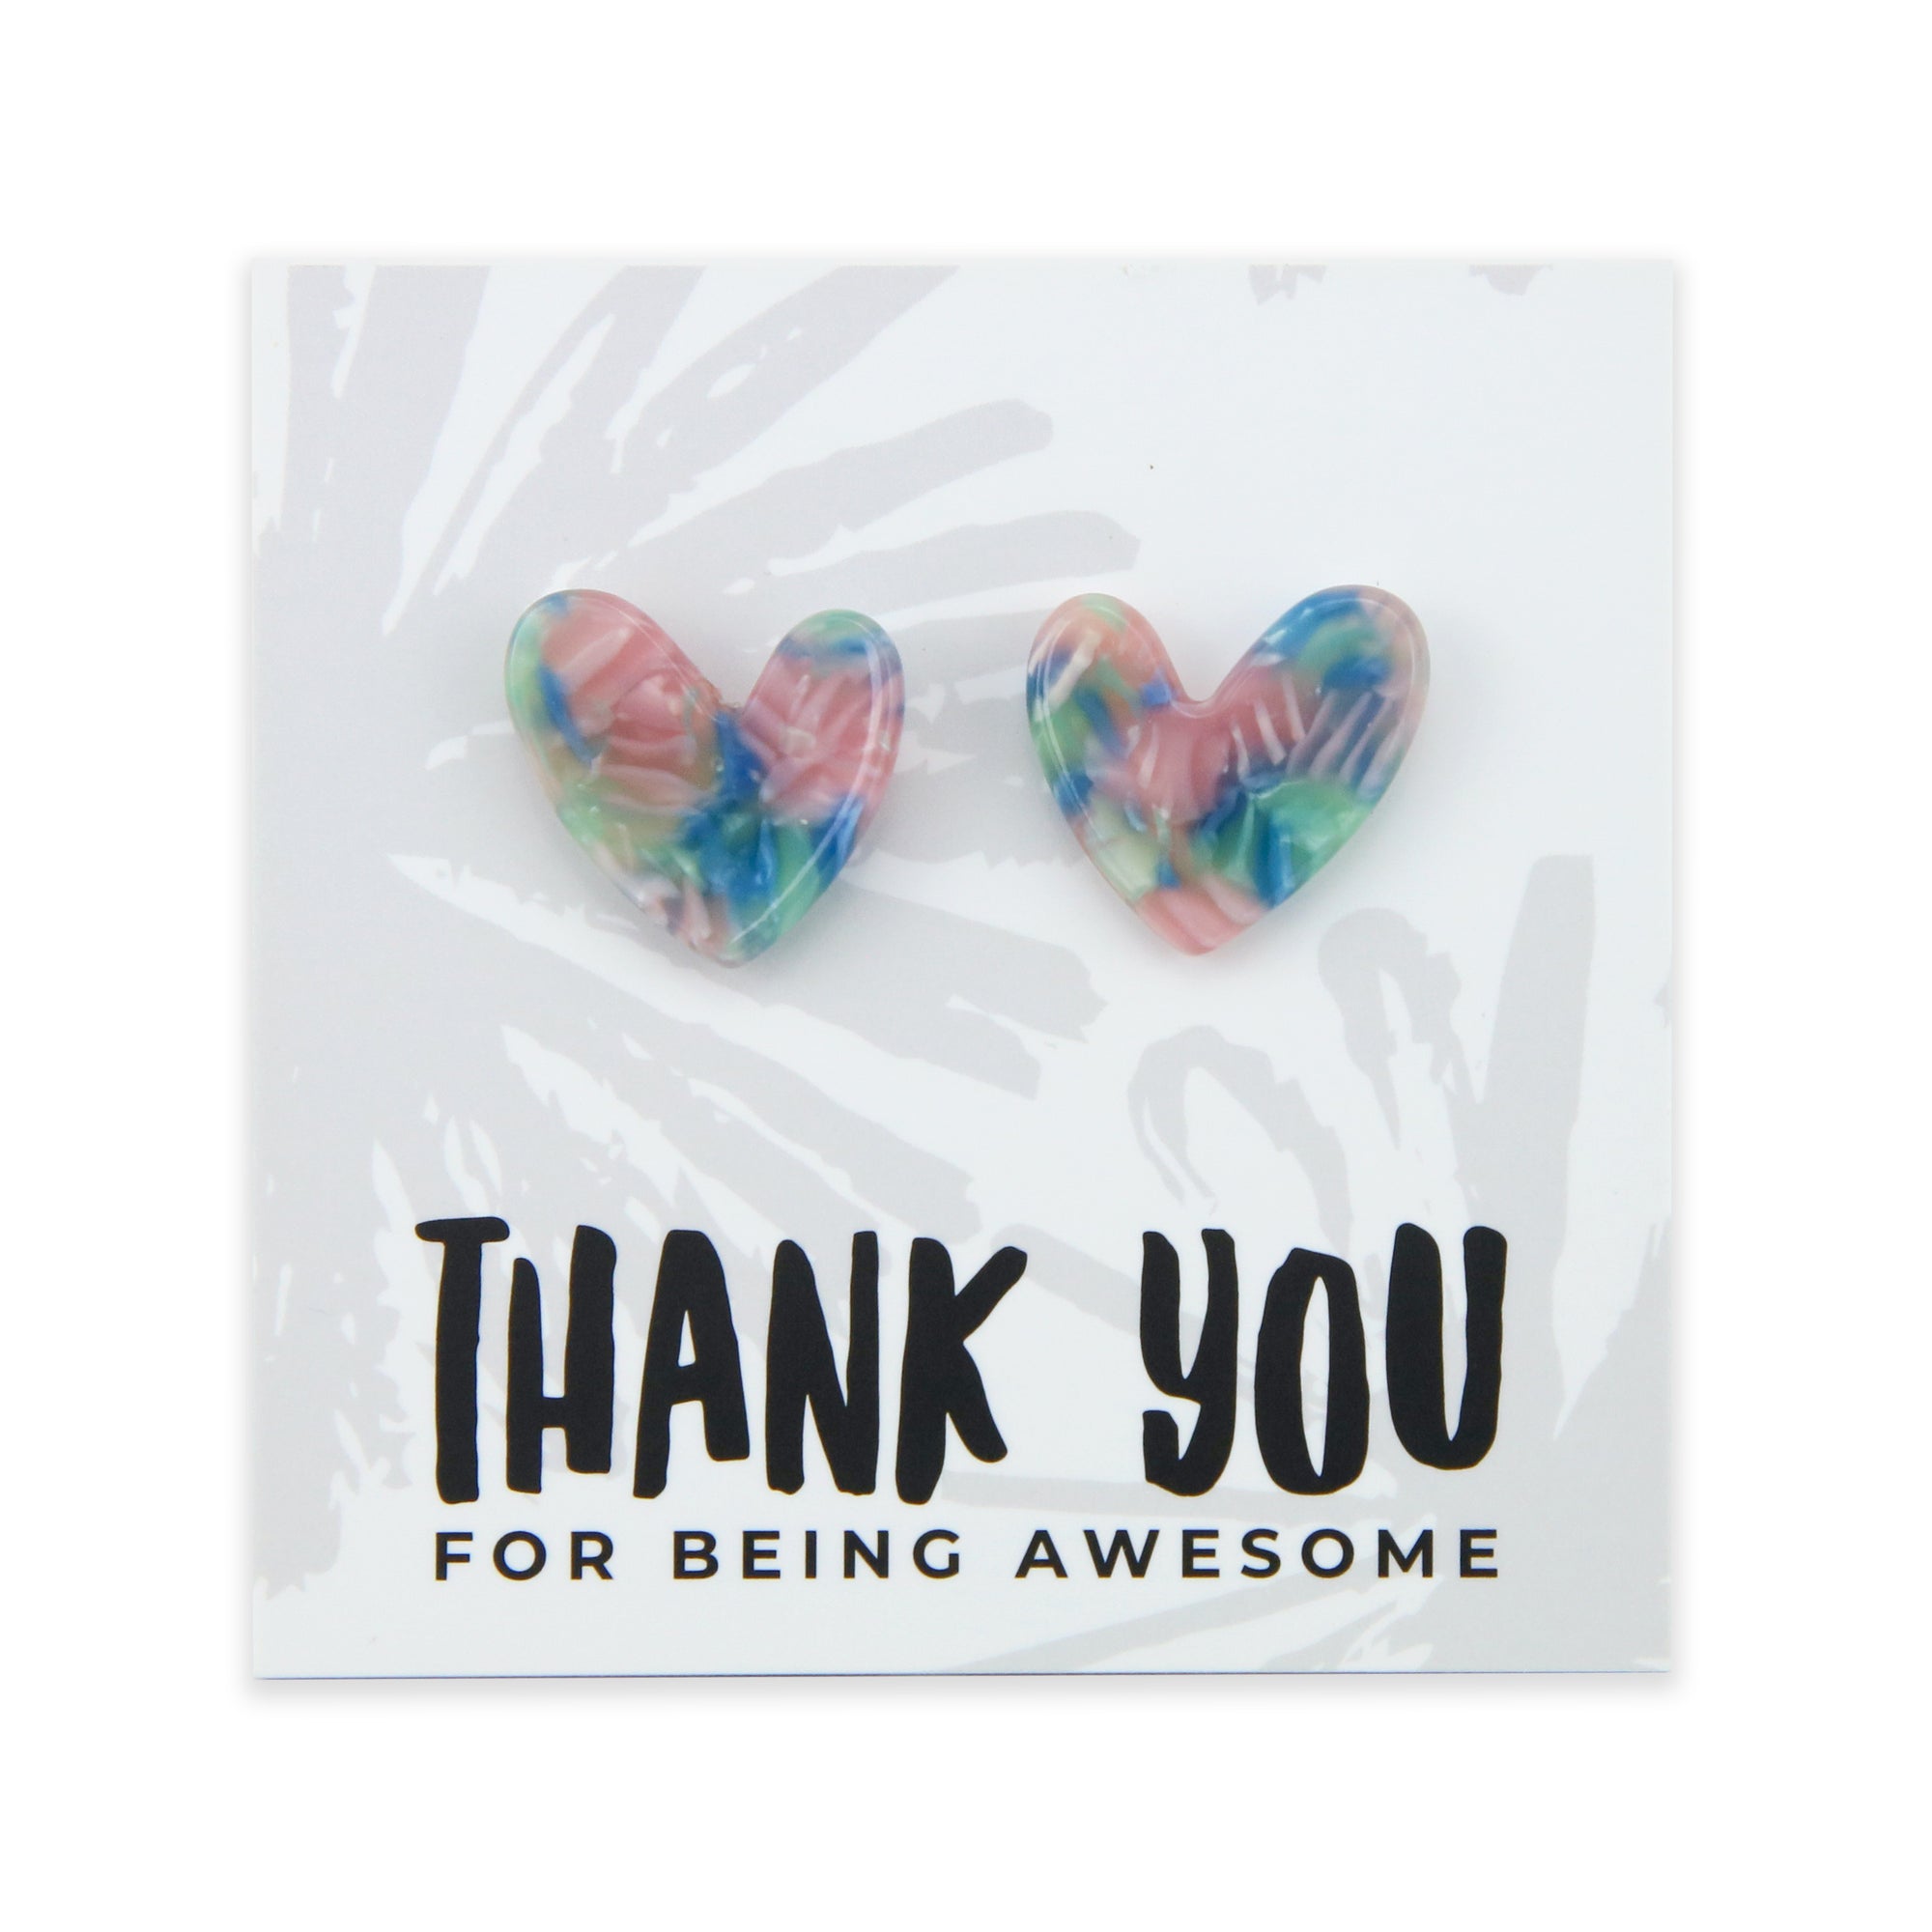 Thank You For Being Awesome - Resin Heart Studs - Twilight (11865)